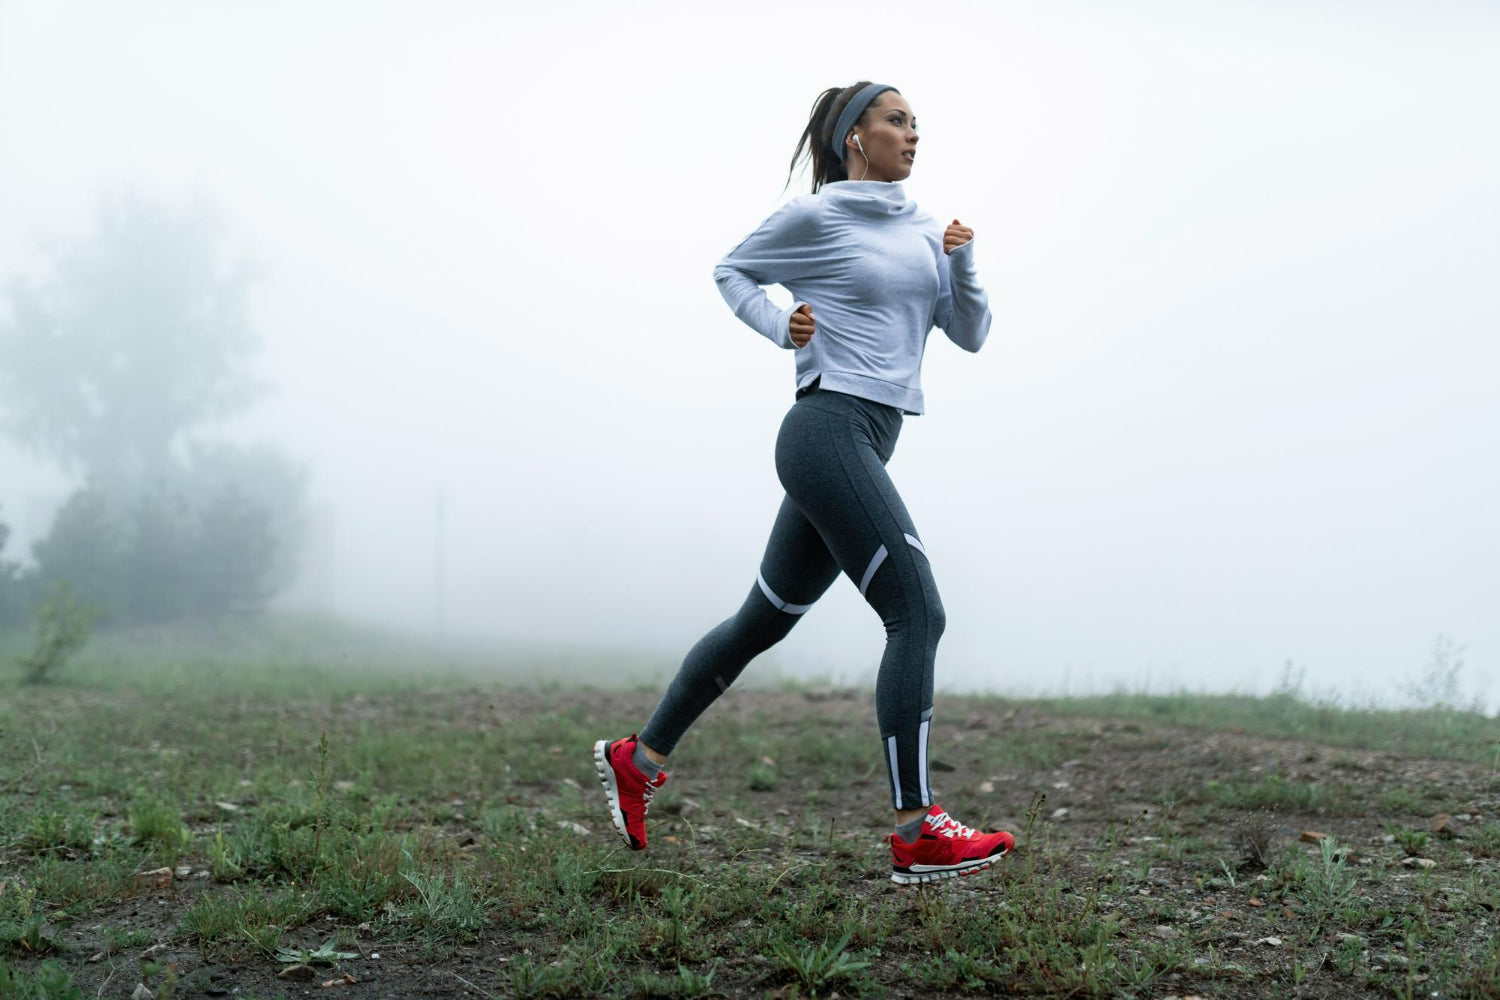 Why Kickboxing Training Needs More Than Just Long-Distance Running